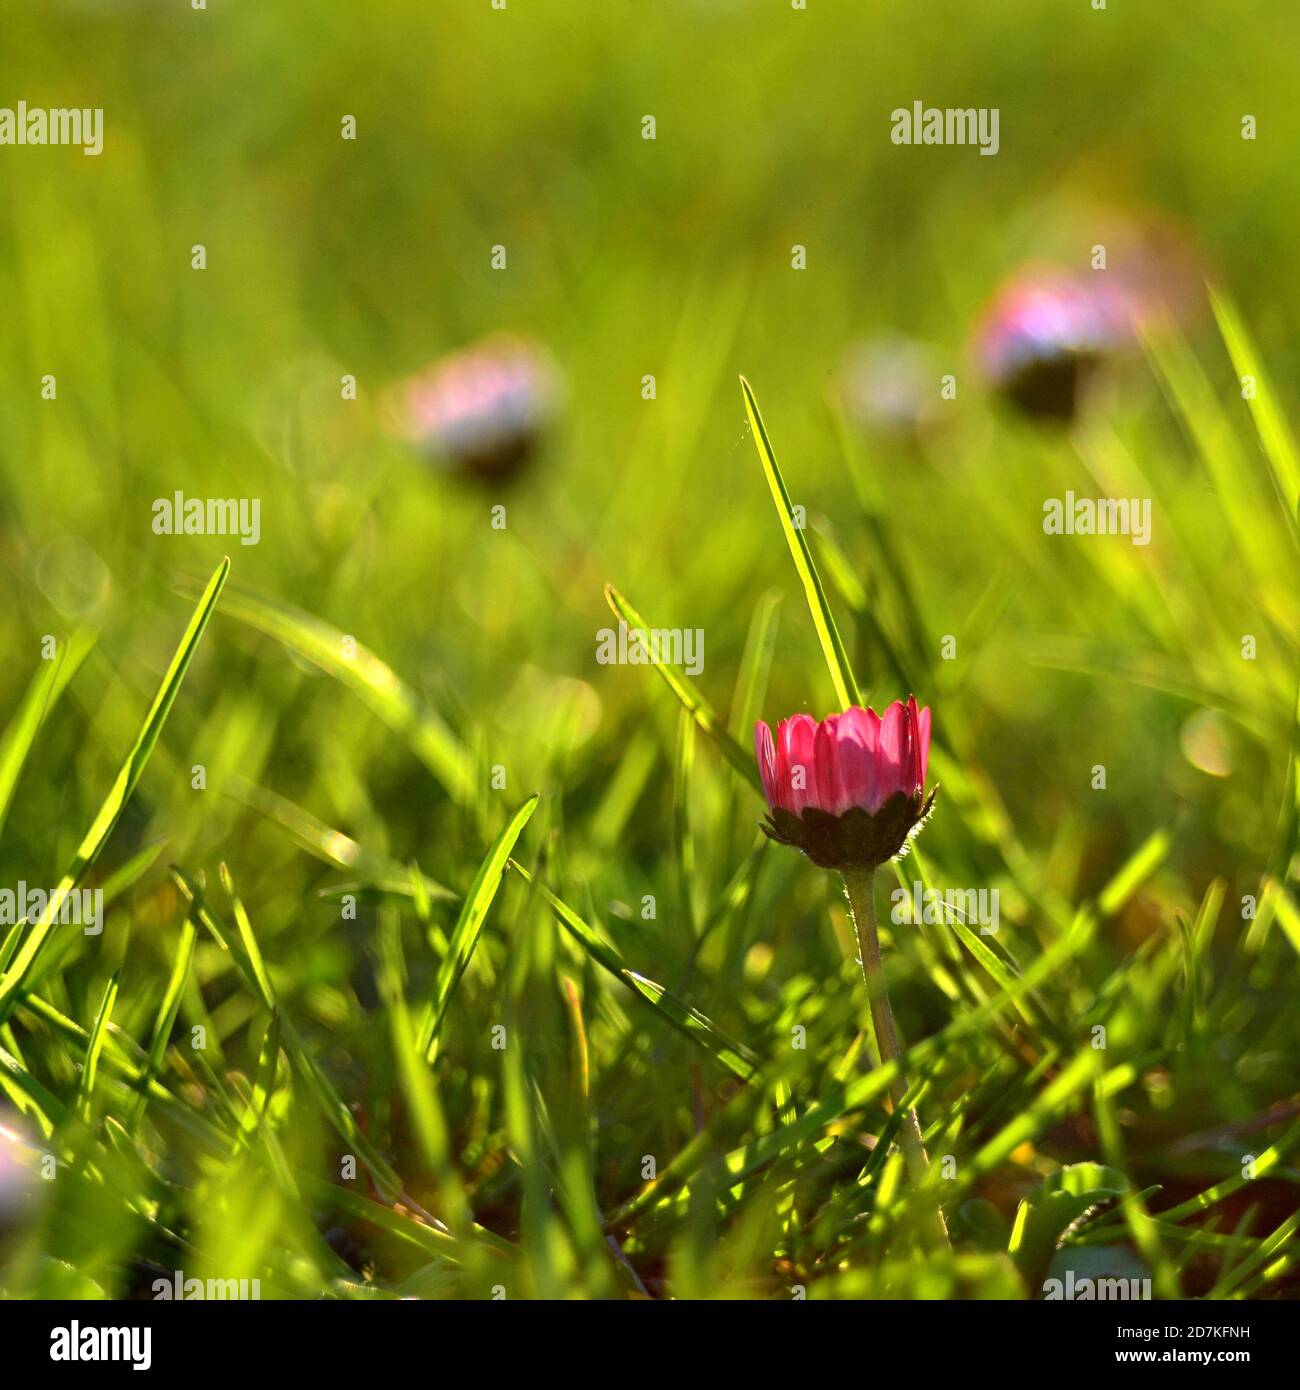 Daisies in the grass. Sunlit flowers. Pink-purple daisy in a green lawn. Stock Photo